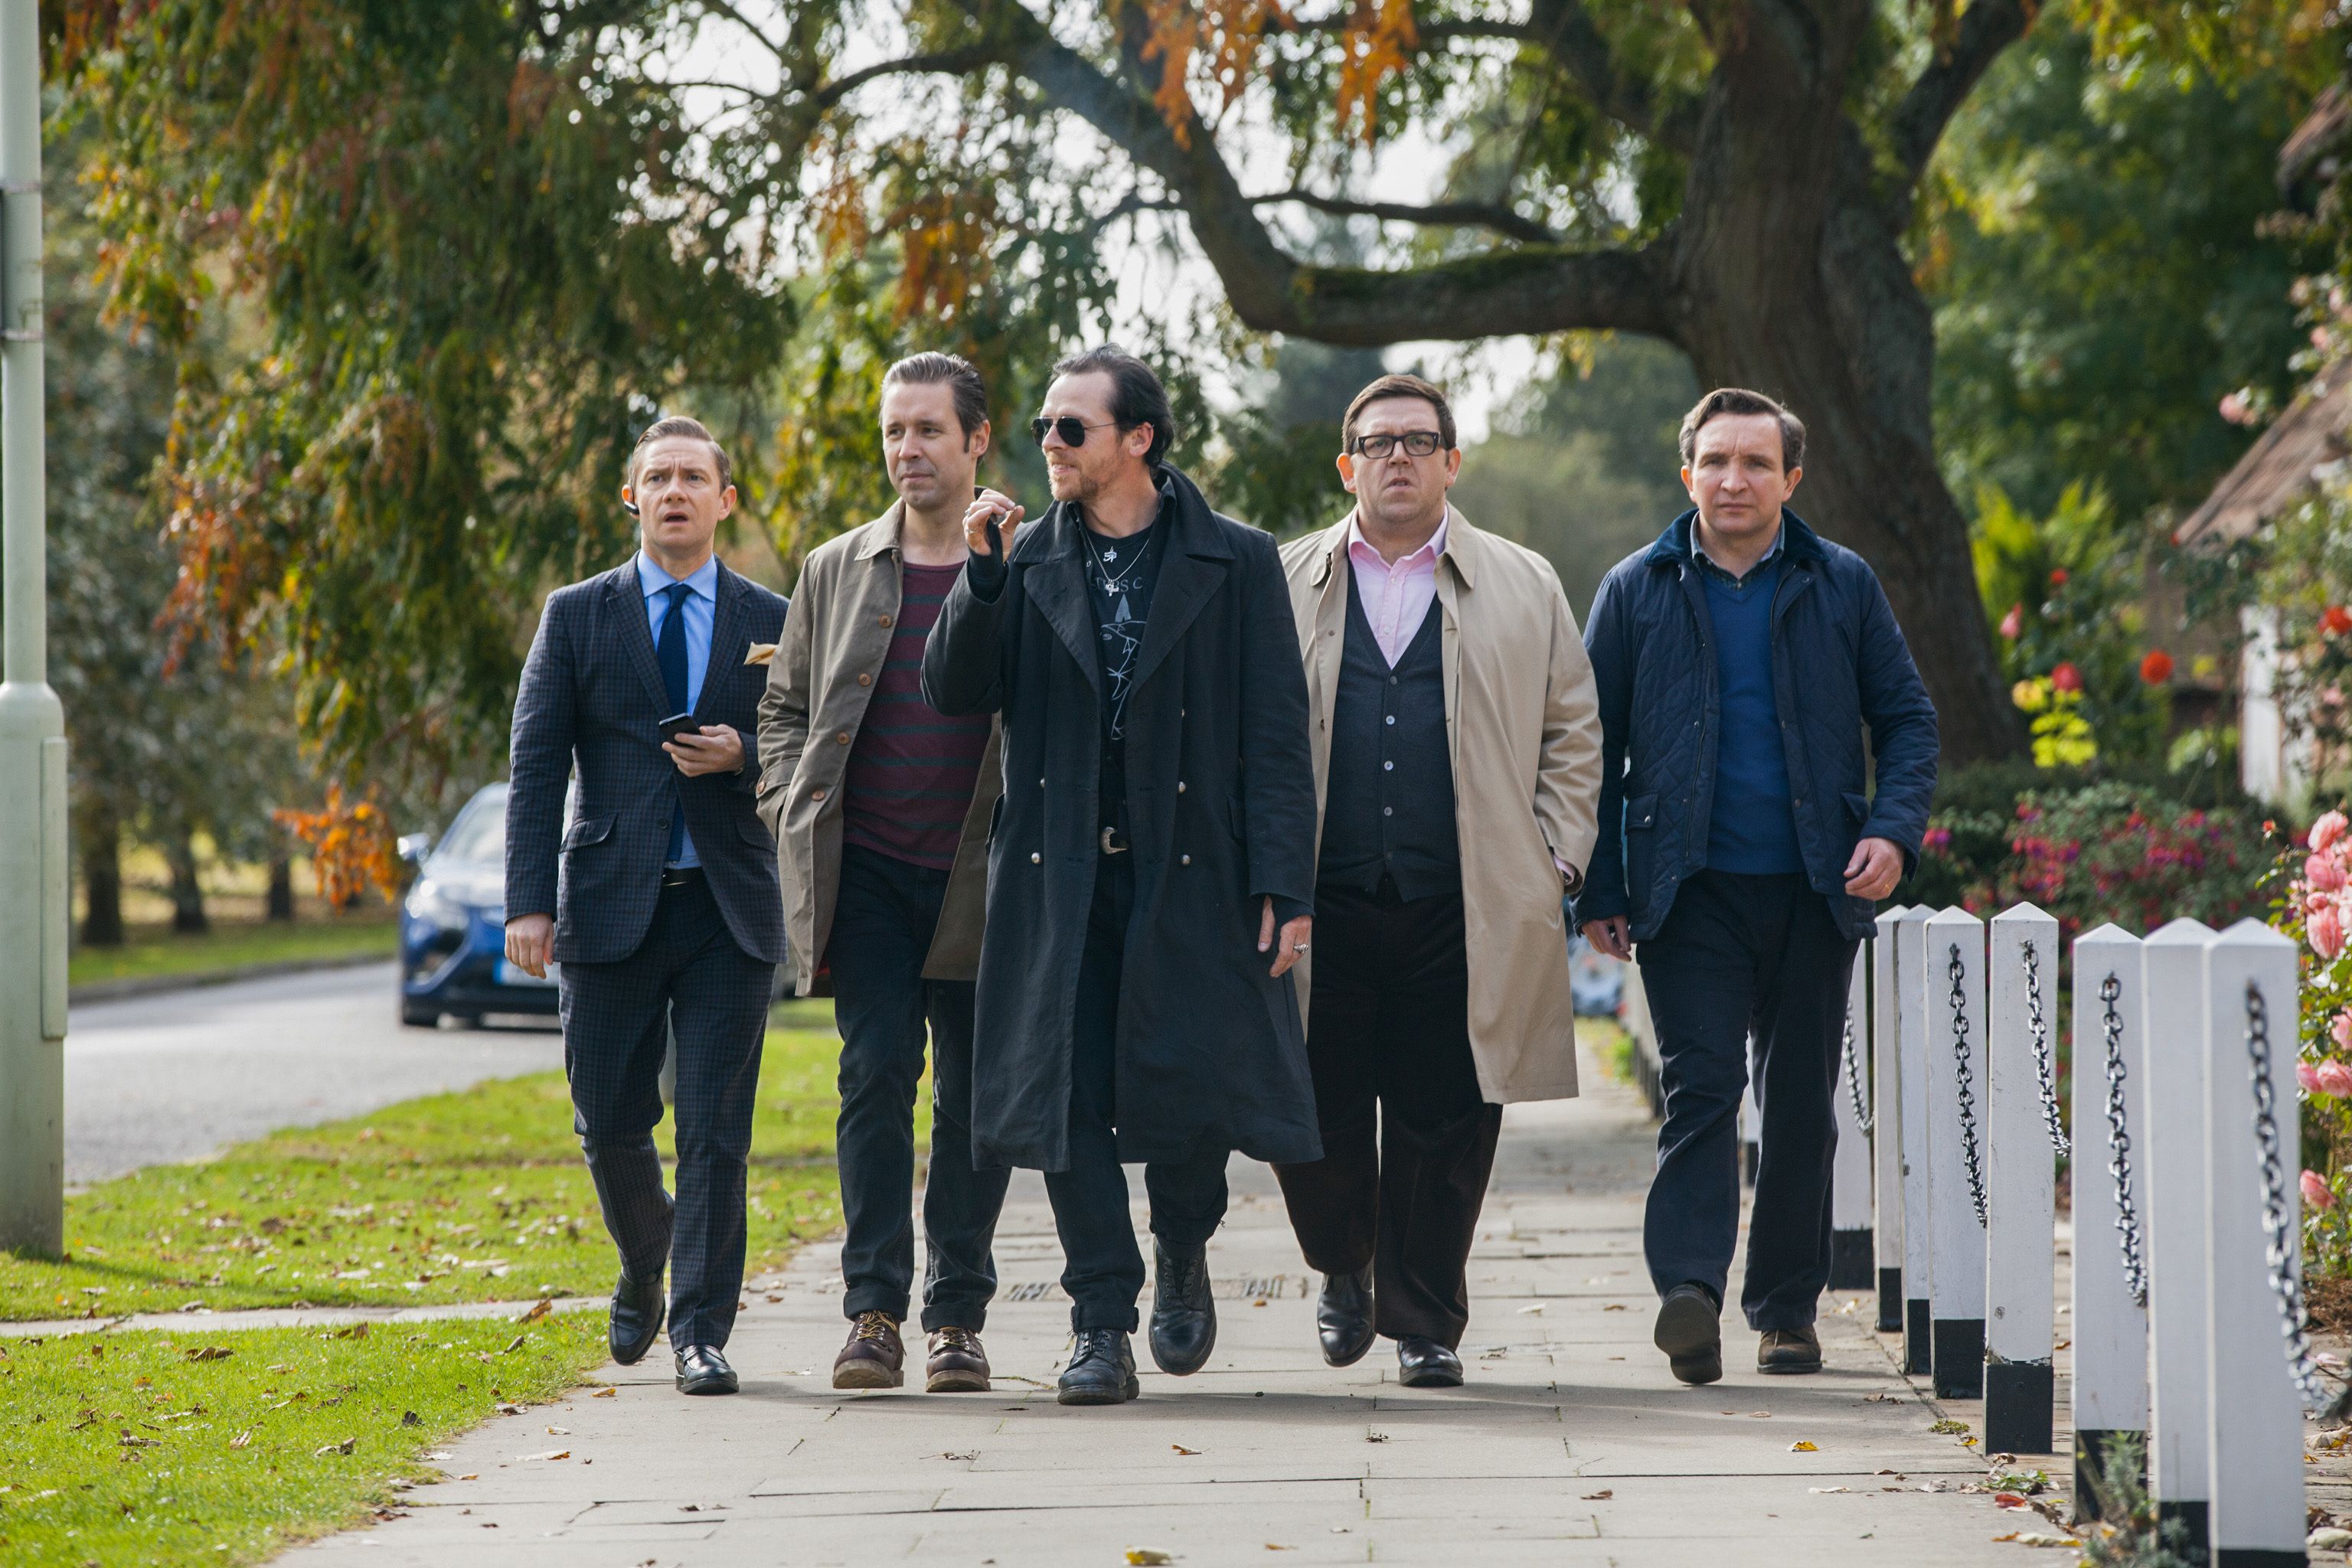 The World's End photo